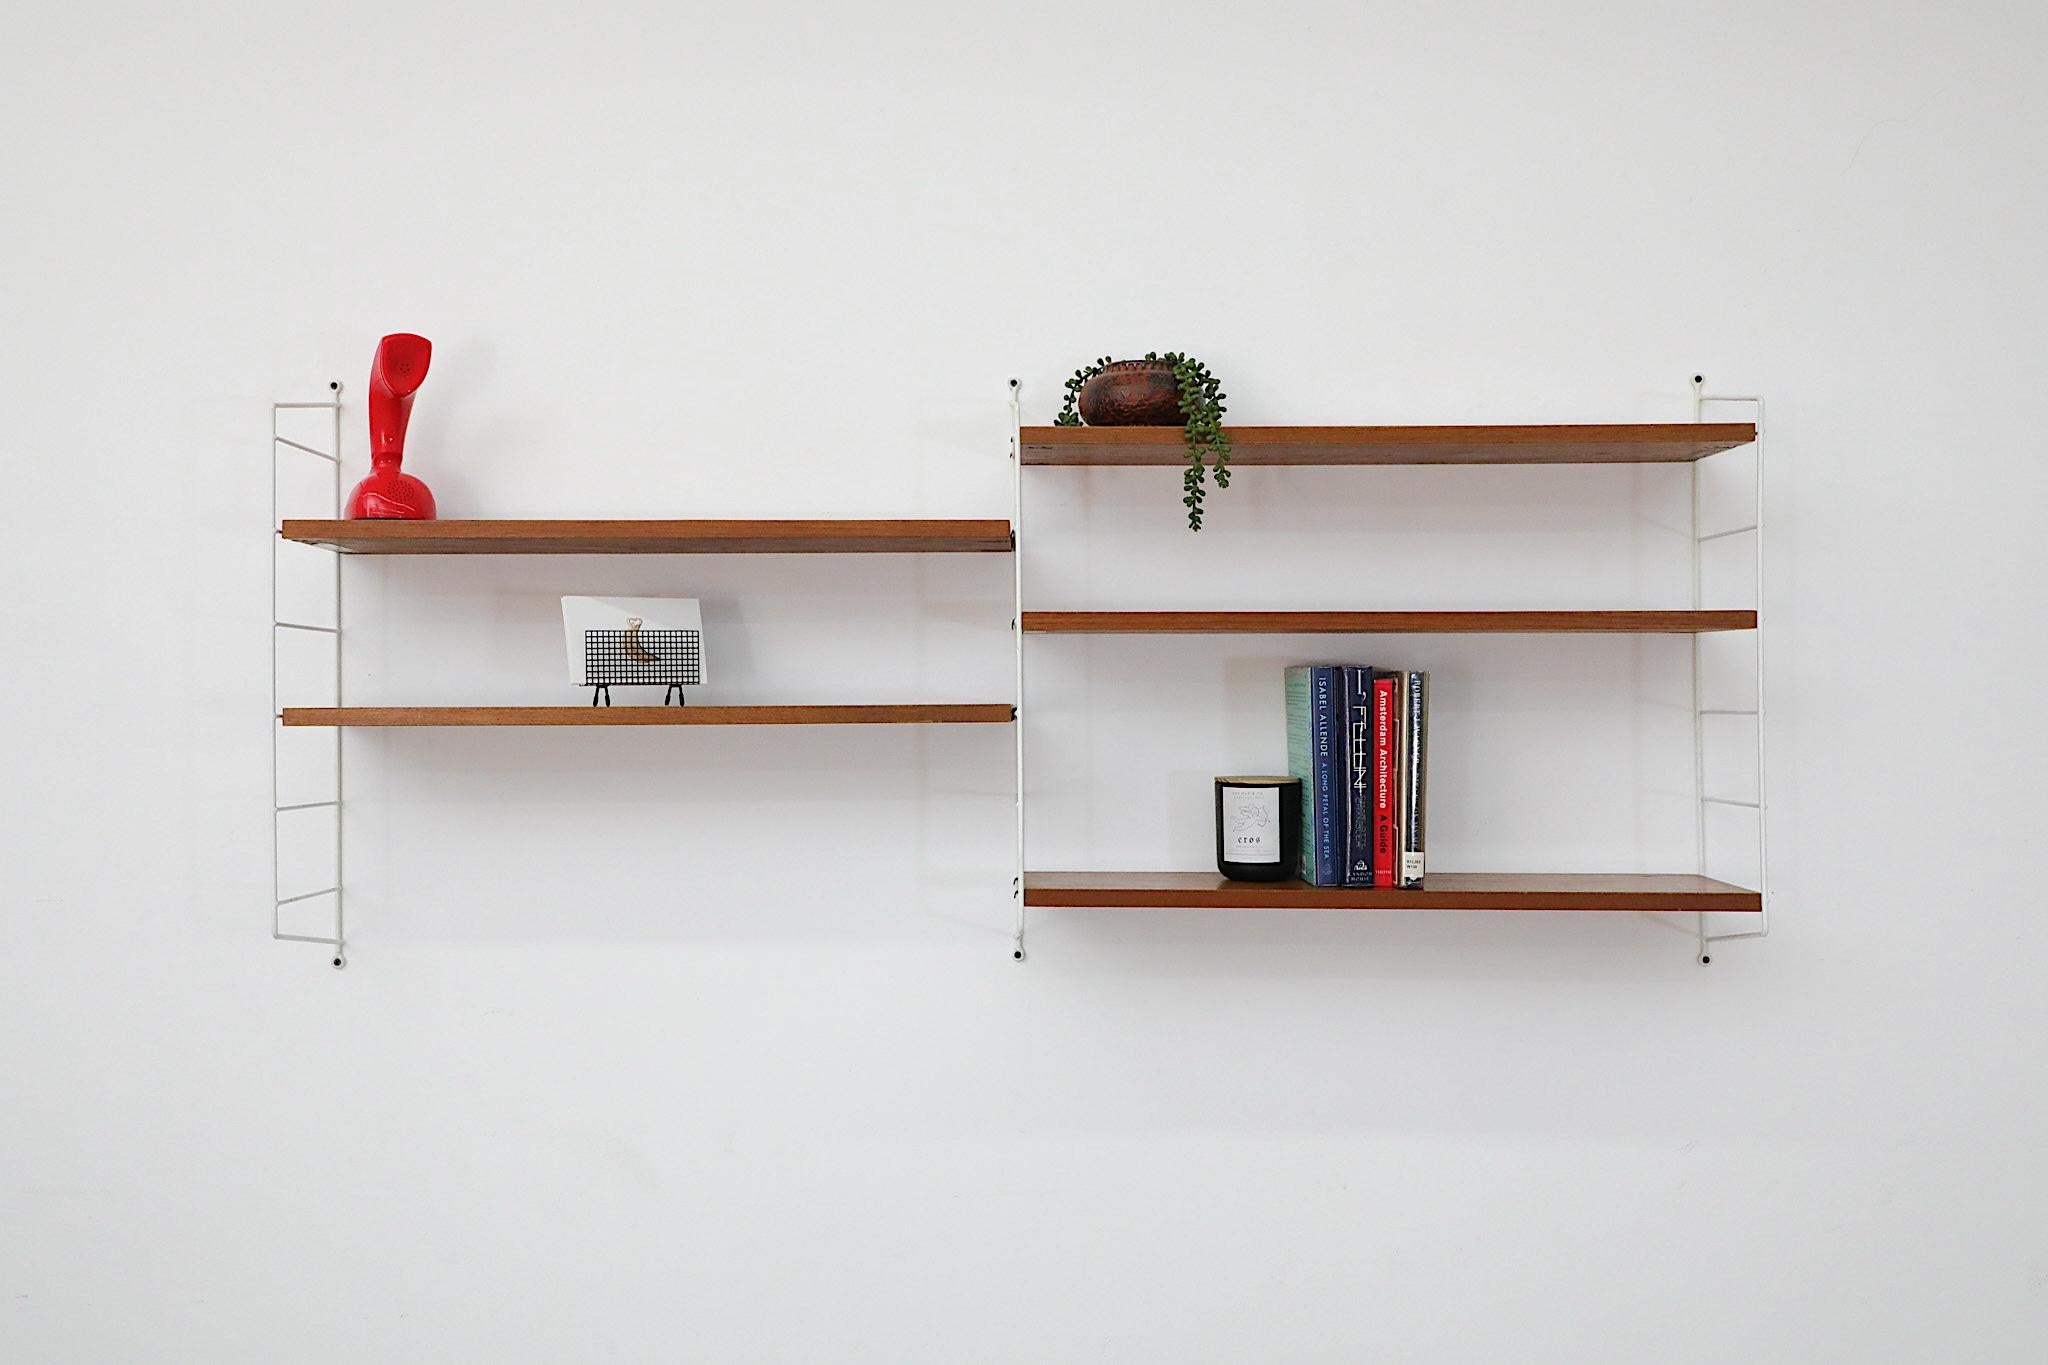 Classic Scandinavian Design String shelving system designed by Nisse Strinning for String, 1949. This two section shelving system has three white wire risers and five adjustable teak shelves. A functional and stylish shelving system with great style